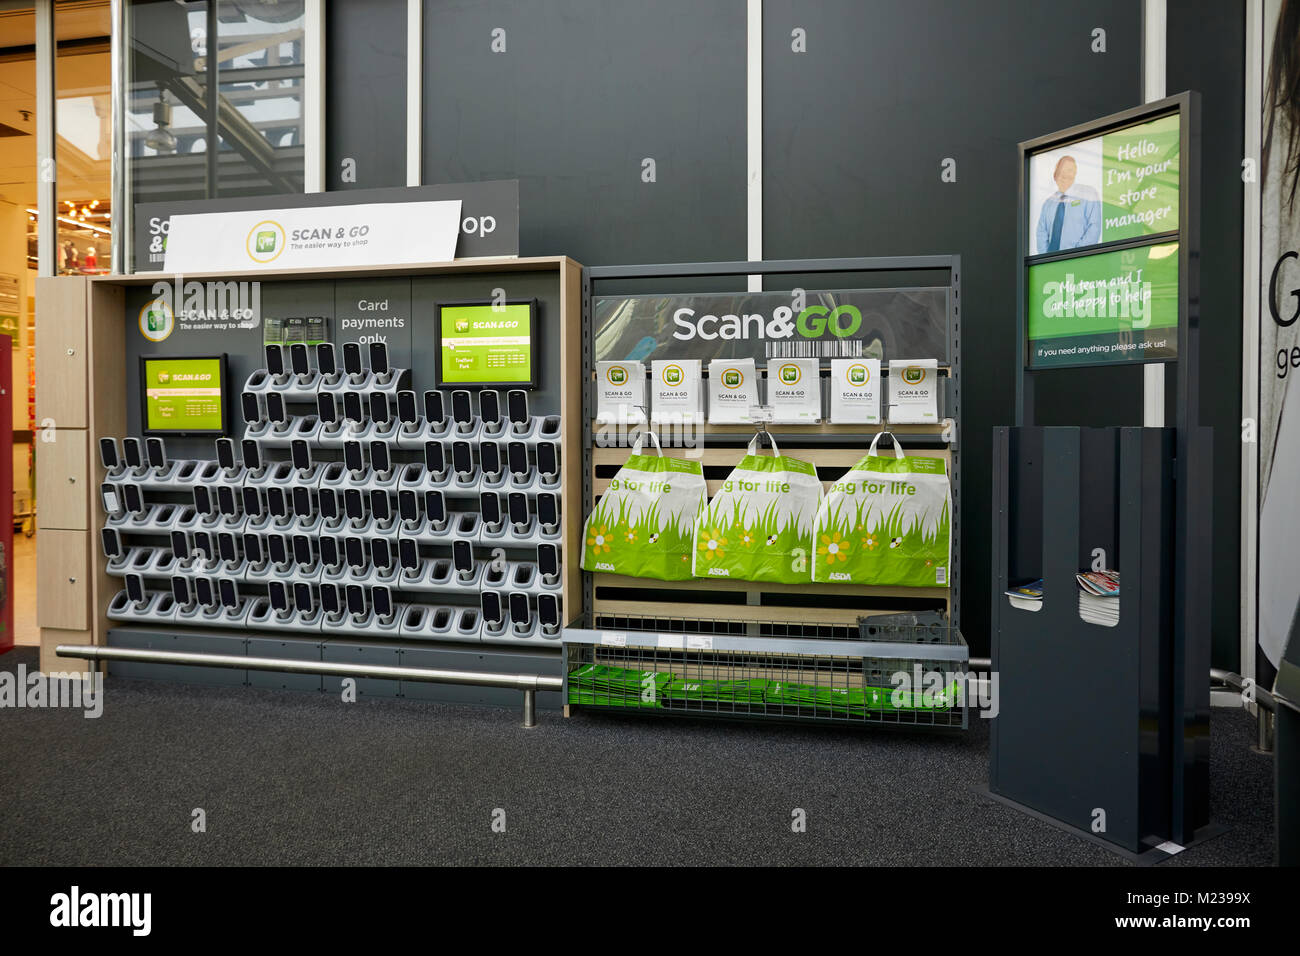 Asda trafford, scan to go, self service scanners. Stock Photo